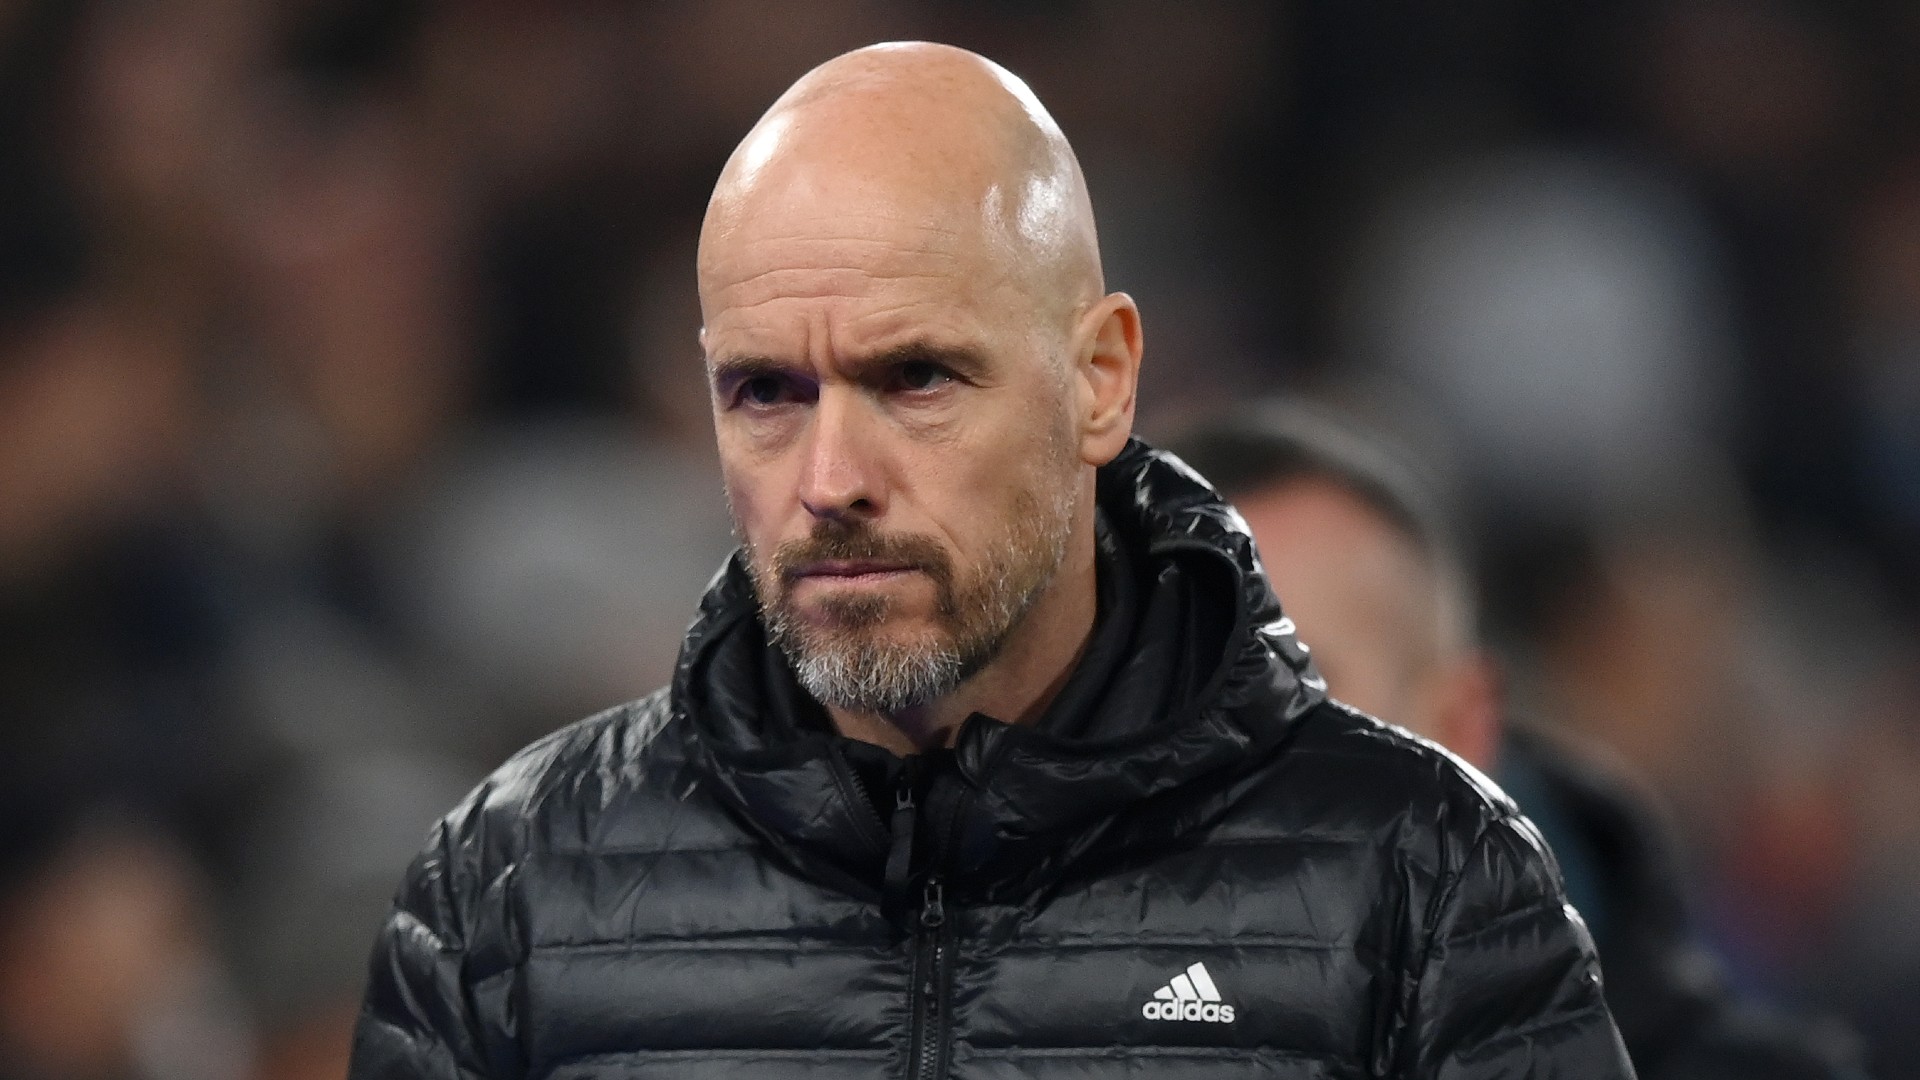 Ten Hag adamant he is right manager